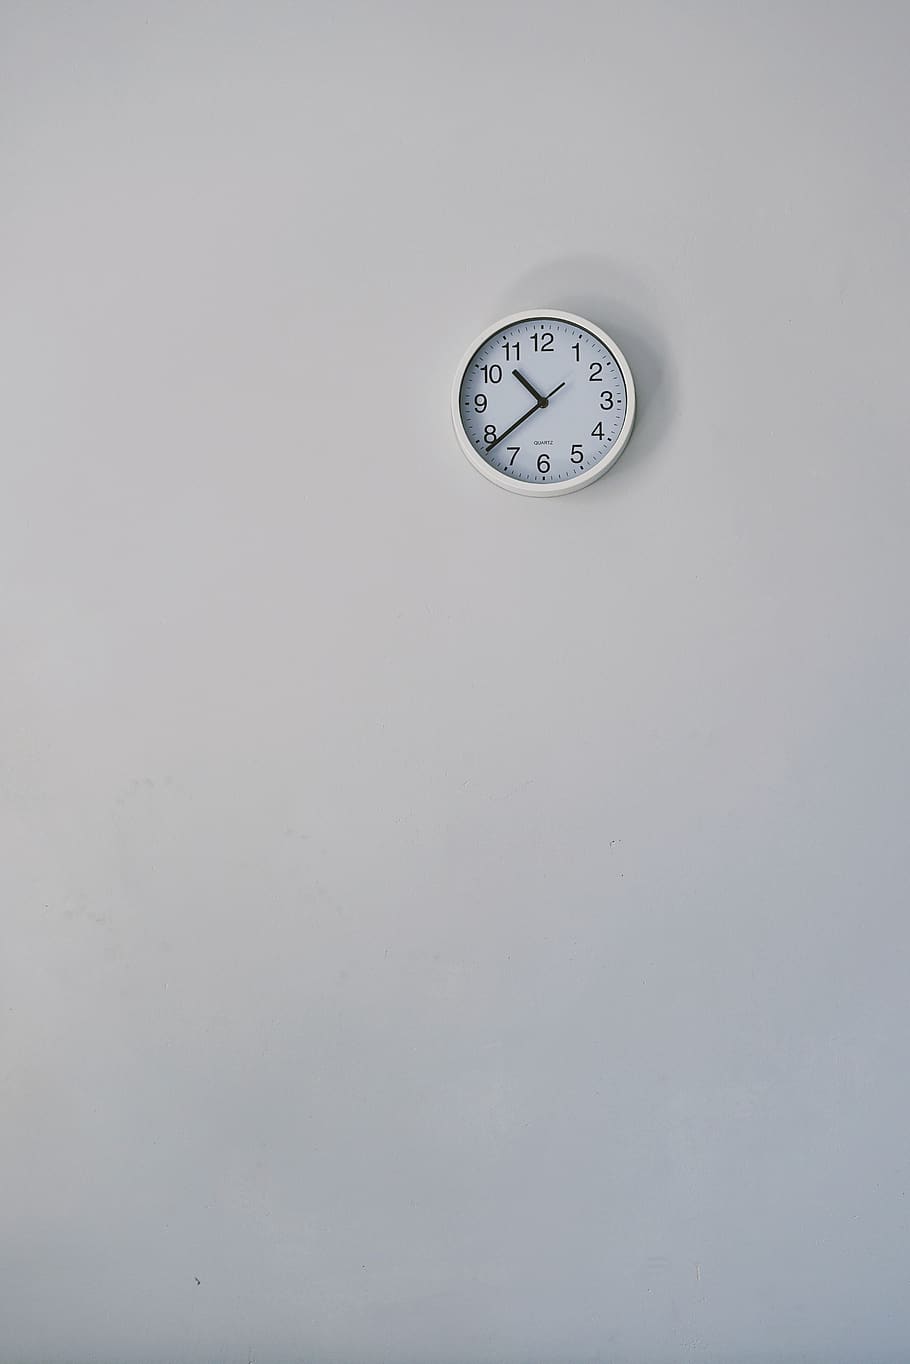 Hd Wallpaper Round White Analog Wall Clock Displaying Time Instrument Of Time